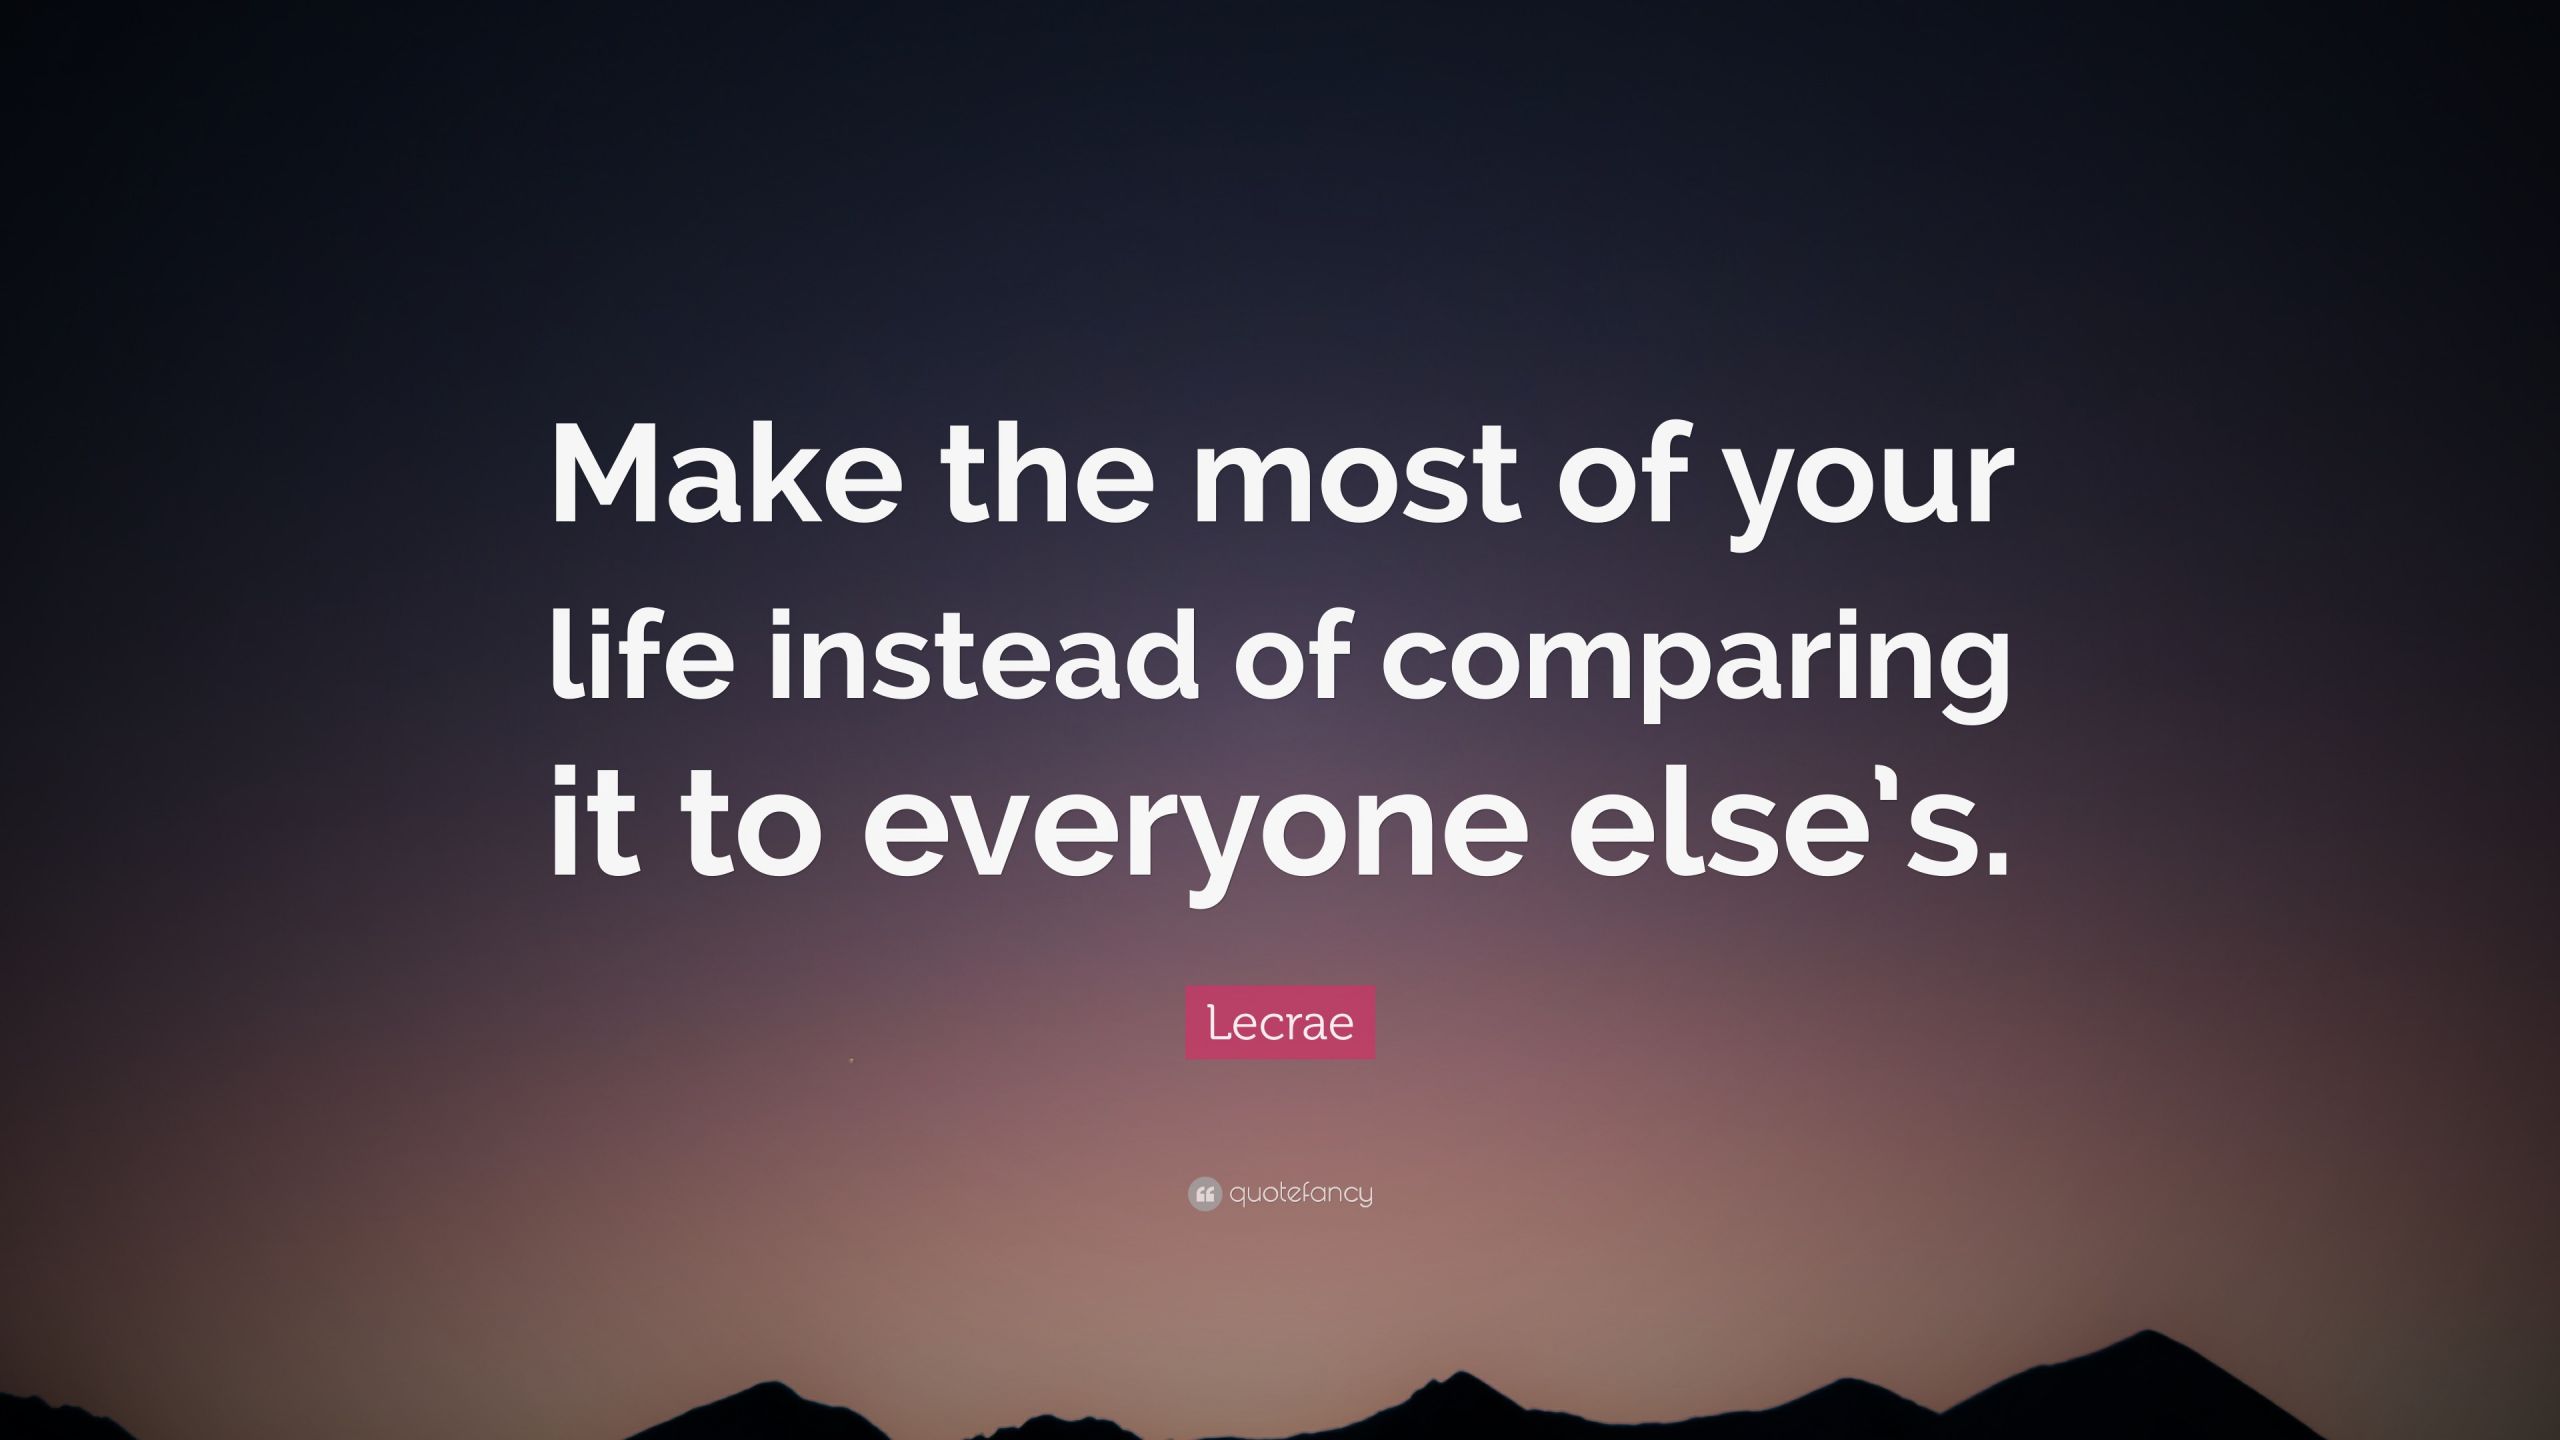 Make The Most Of Life Quotes
 Lecrae Quote “Make the most of your life instead of